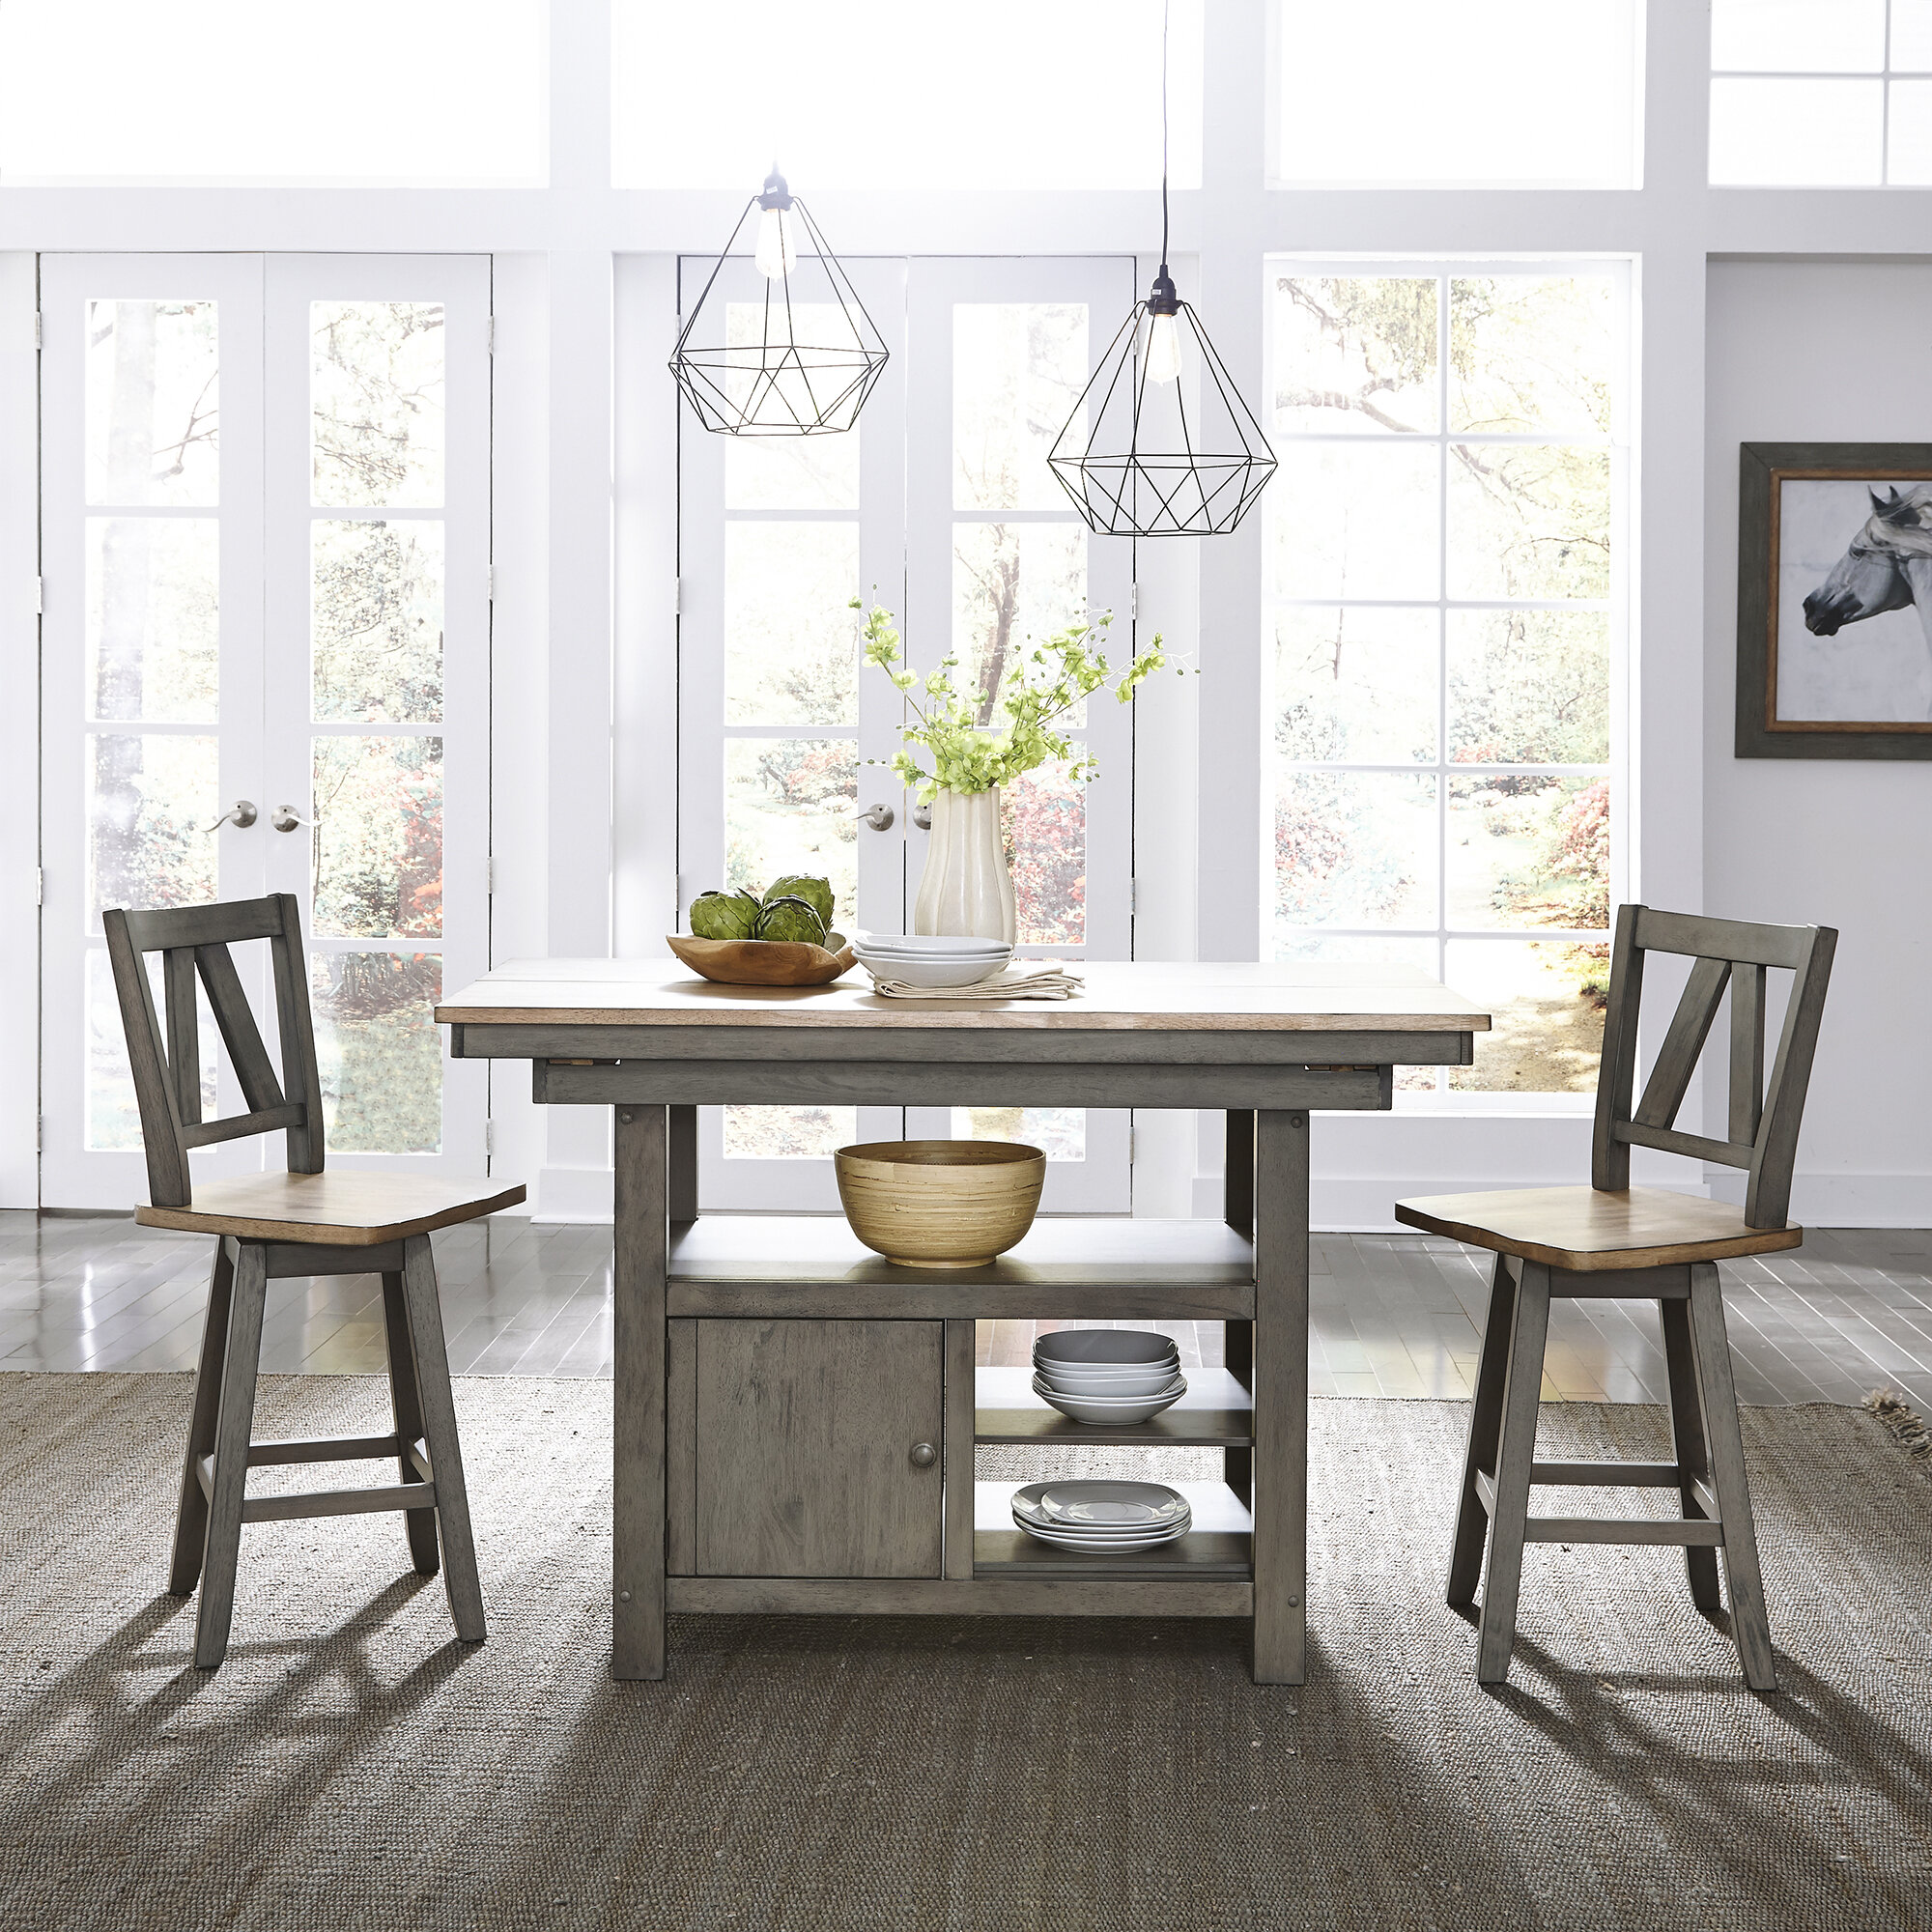 Wayfair Kitchen Islands With Seating You Ll Love In 2021